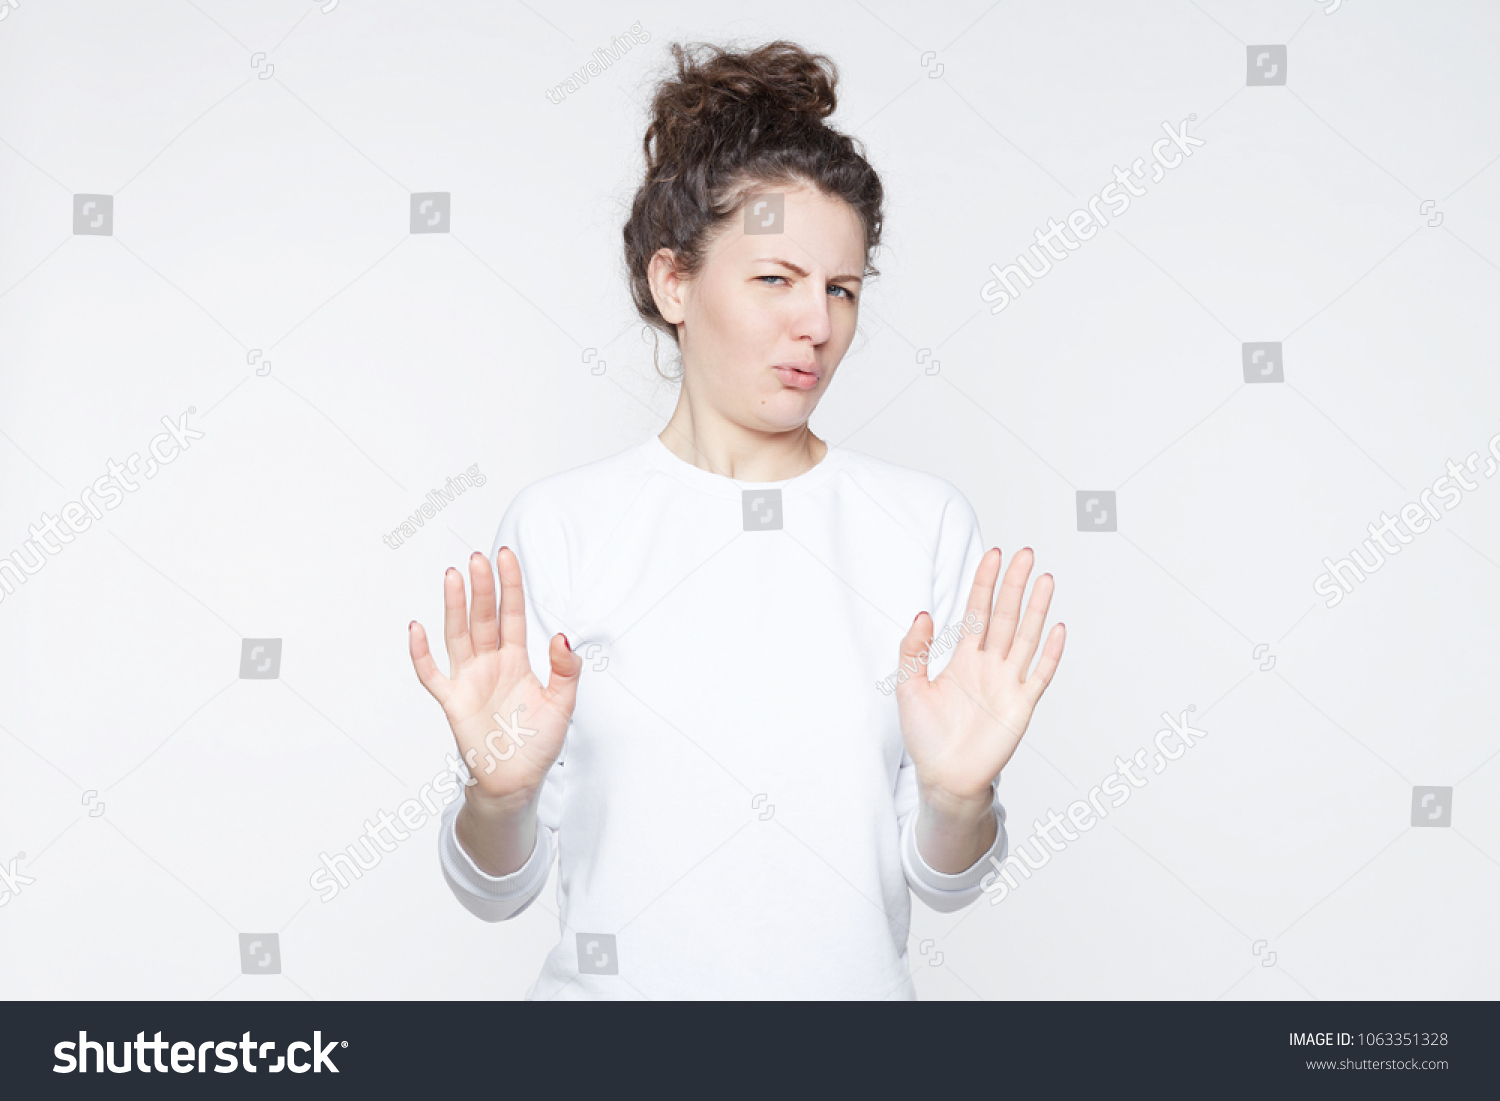 Body language. Disgusted stressed out beautiful young woman with hair knot posing at studio wall, keeping hands in stop gesture, grimacing, trying to defend herself as if saying: Stay away from me. #1063351328